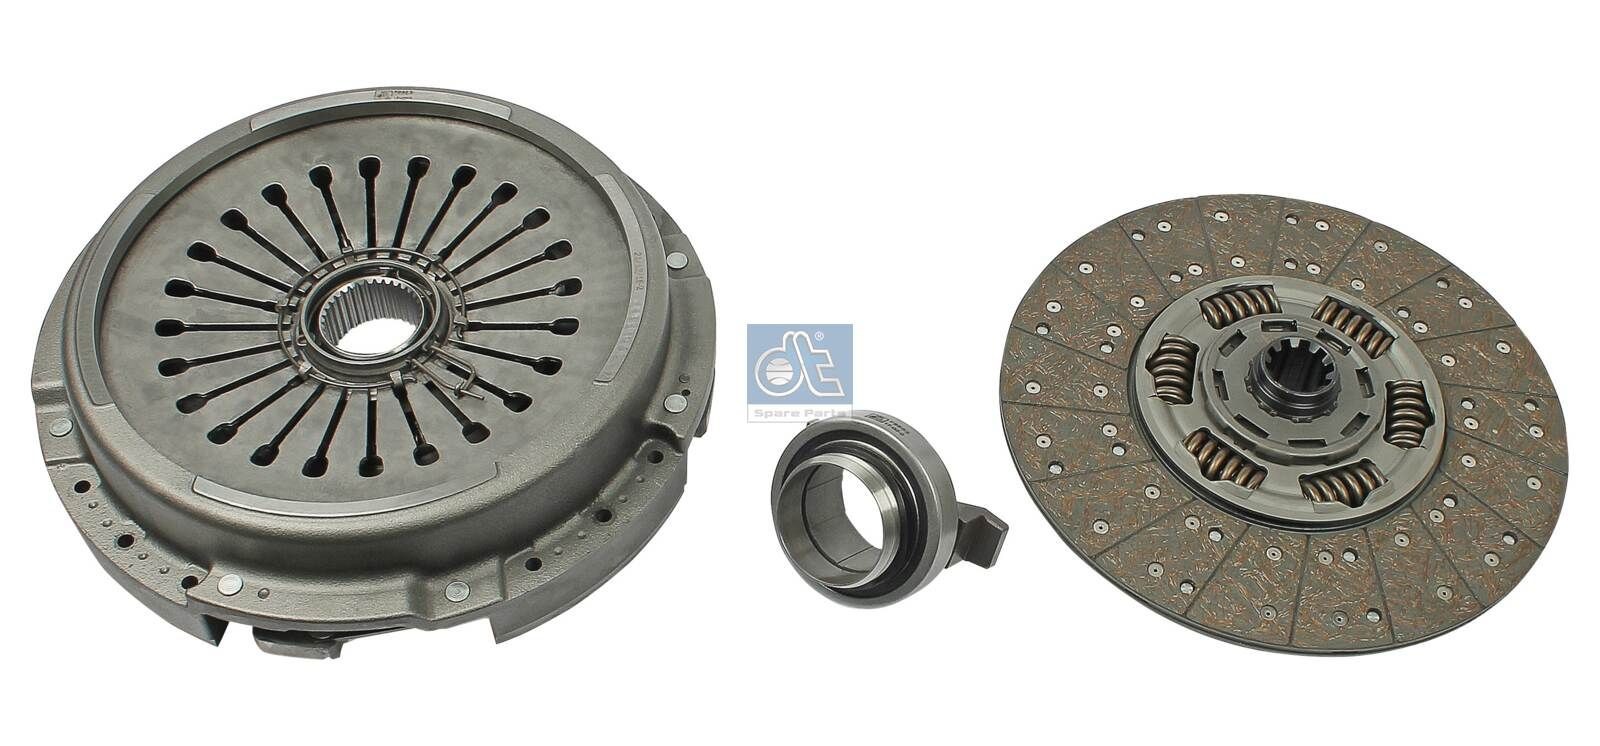 3400 700 327 DT Spare Parts 430mm Ø: 430mm Clutch replacement kit 3.94032 buy